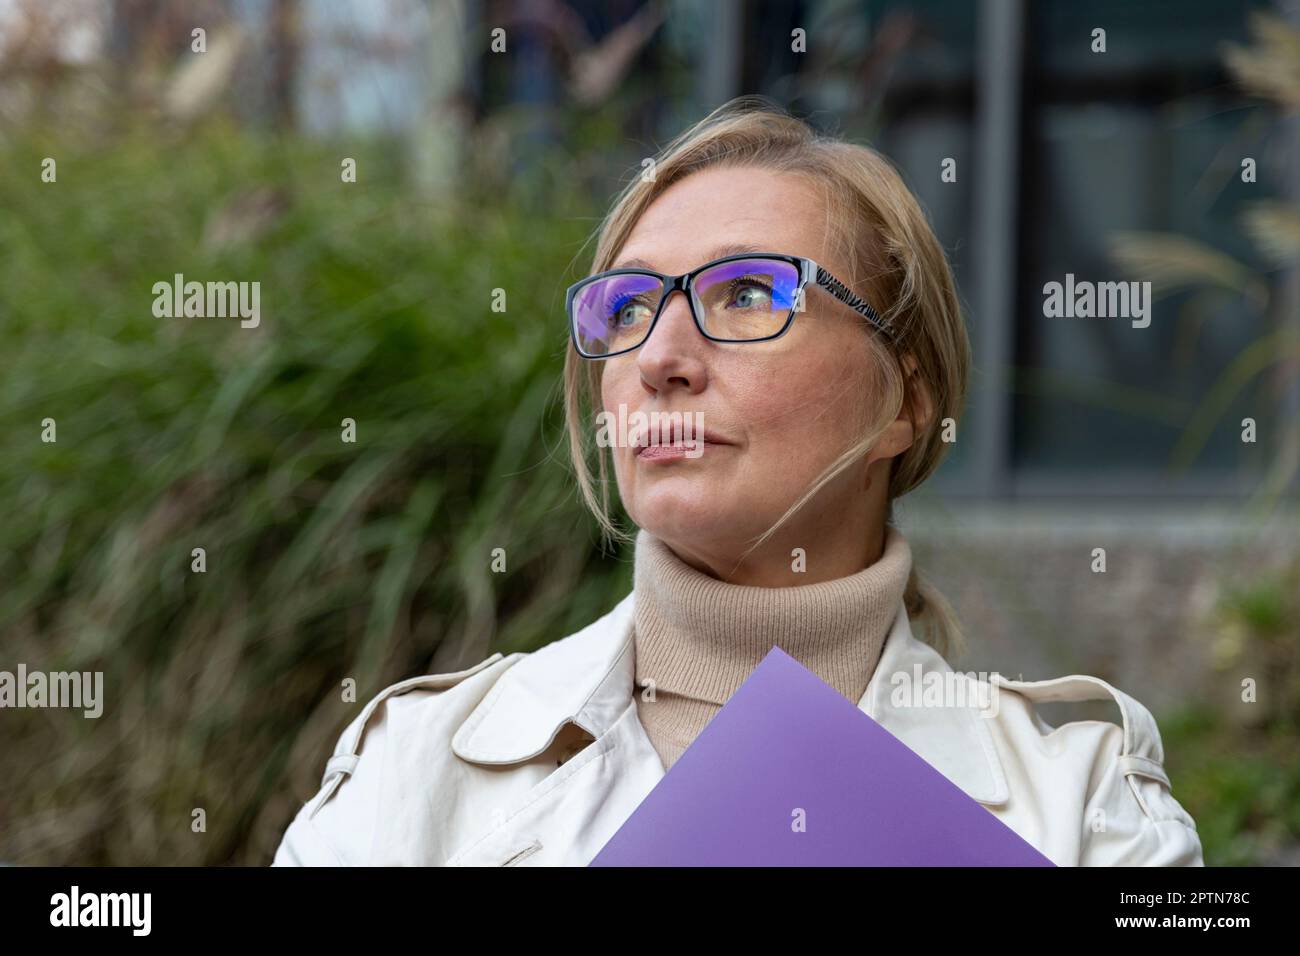 Beautiful matur woman stands near glass building with a folder Stock Photo